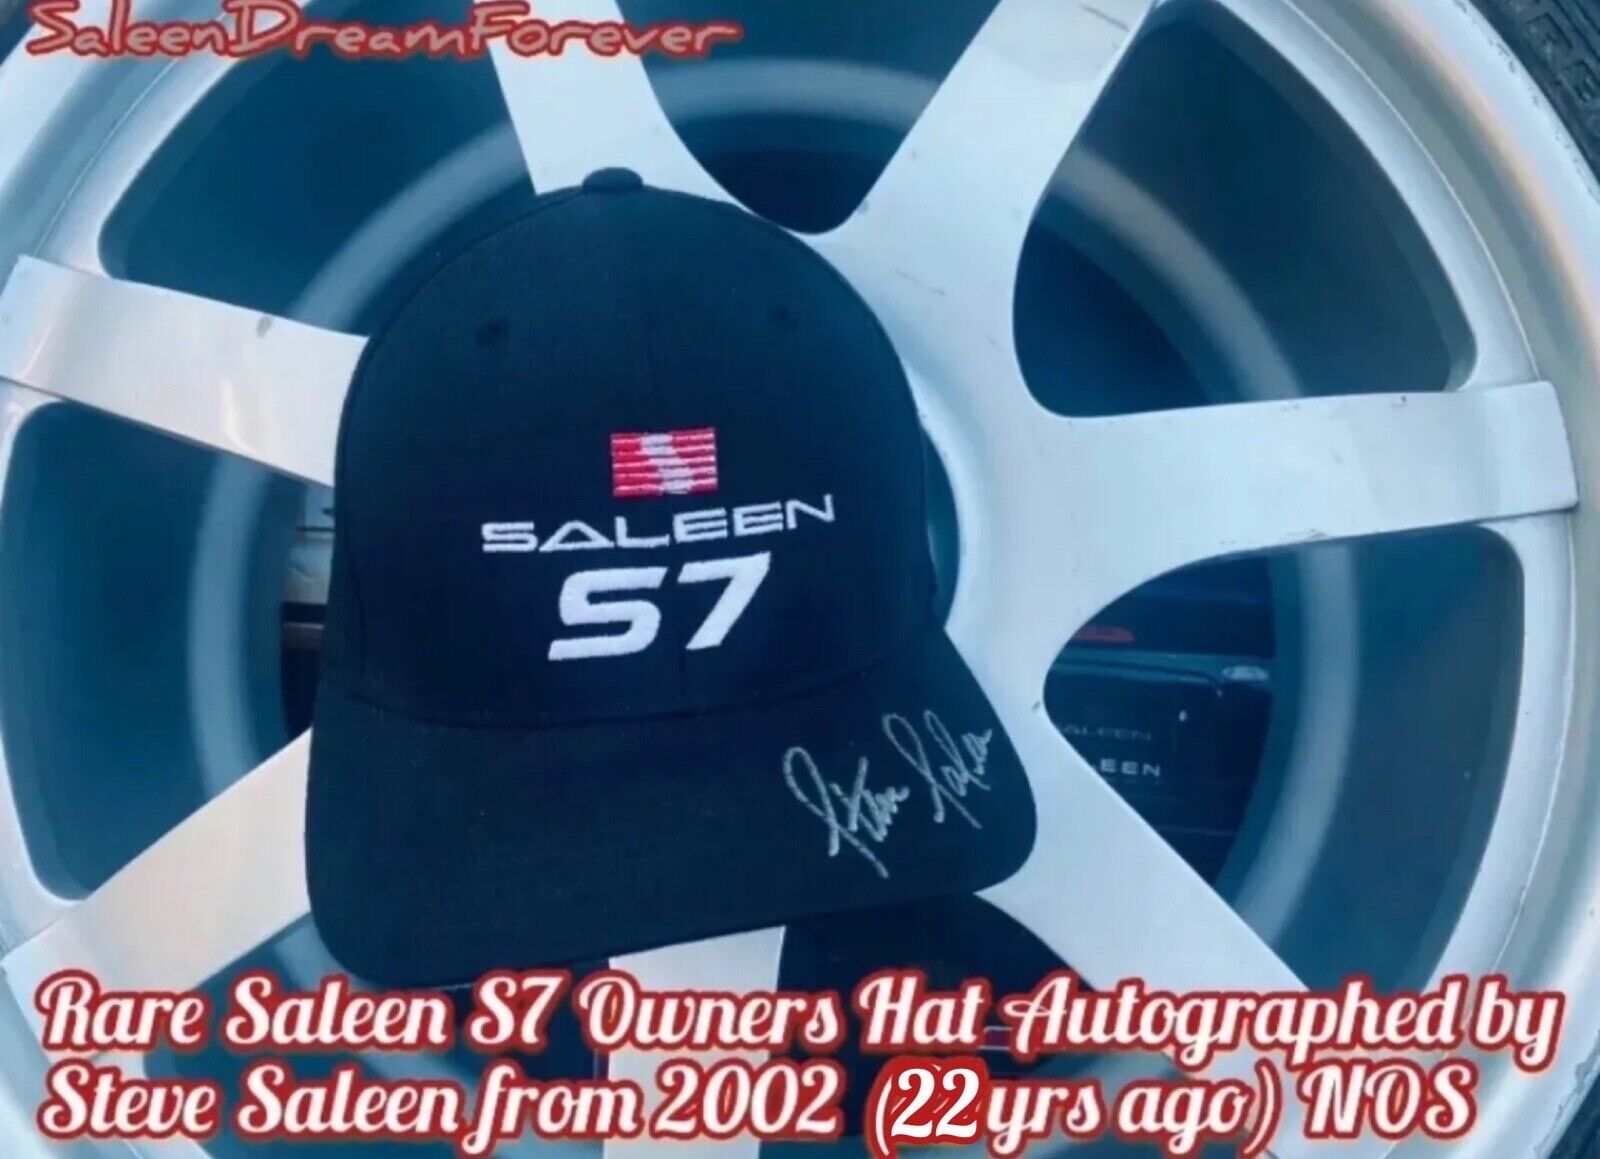 RARE SALEEN S7 OWNERS HAT NOS FRM 02 AUTOGRAPHED BY STEVE S FORD 427 NA MUSTANG